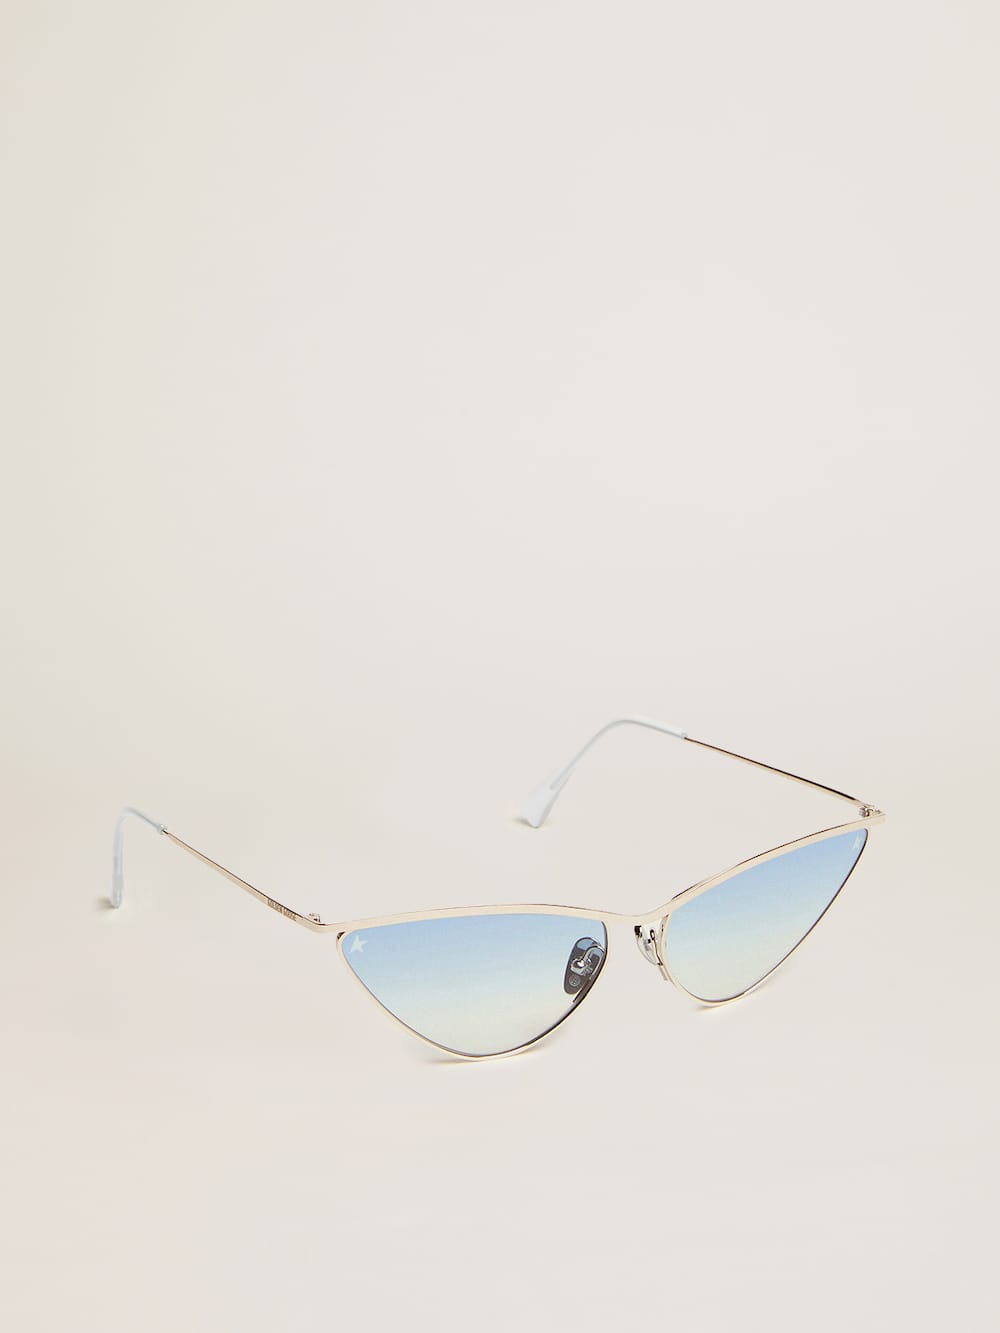 Golden Goose - Sunglasses cat-eye style with silver frame and blue lenses in 